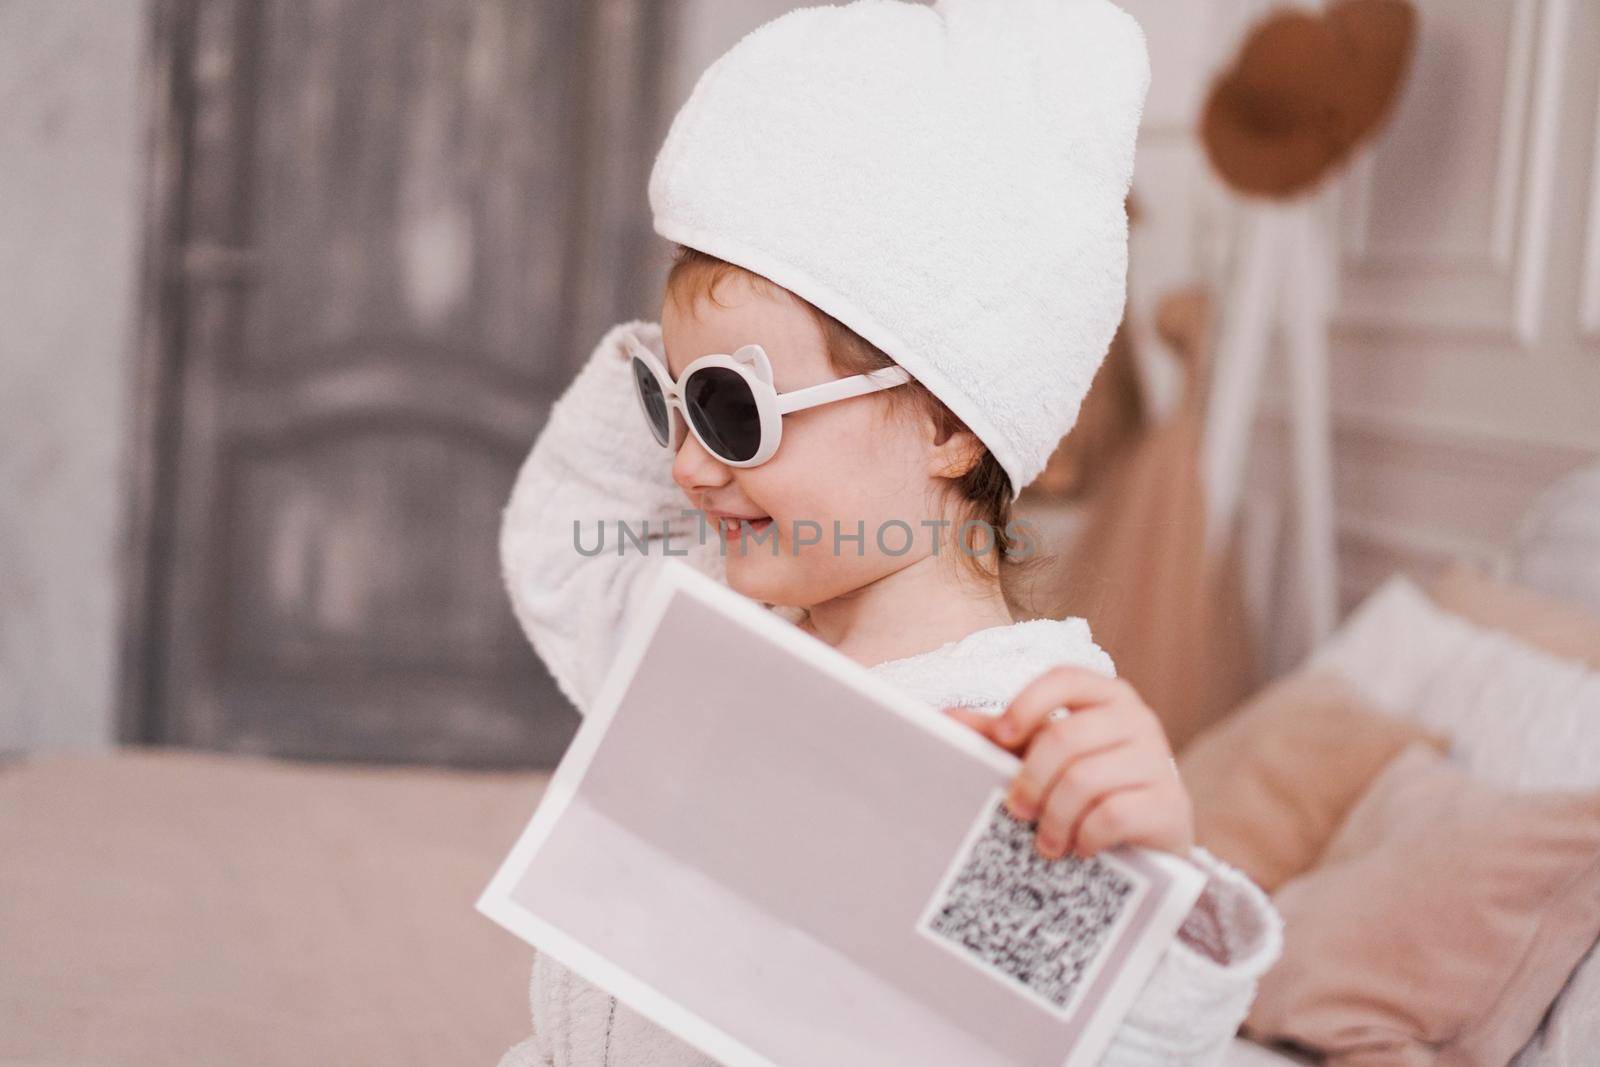 Smiling little girl in a white bathrobe after a bath. White cozy interior. Hygiene and baby fashion concept. She is wearing sunglasses, the girl is holding a magazine in her hand